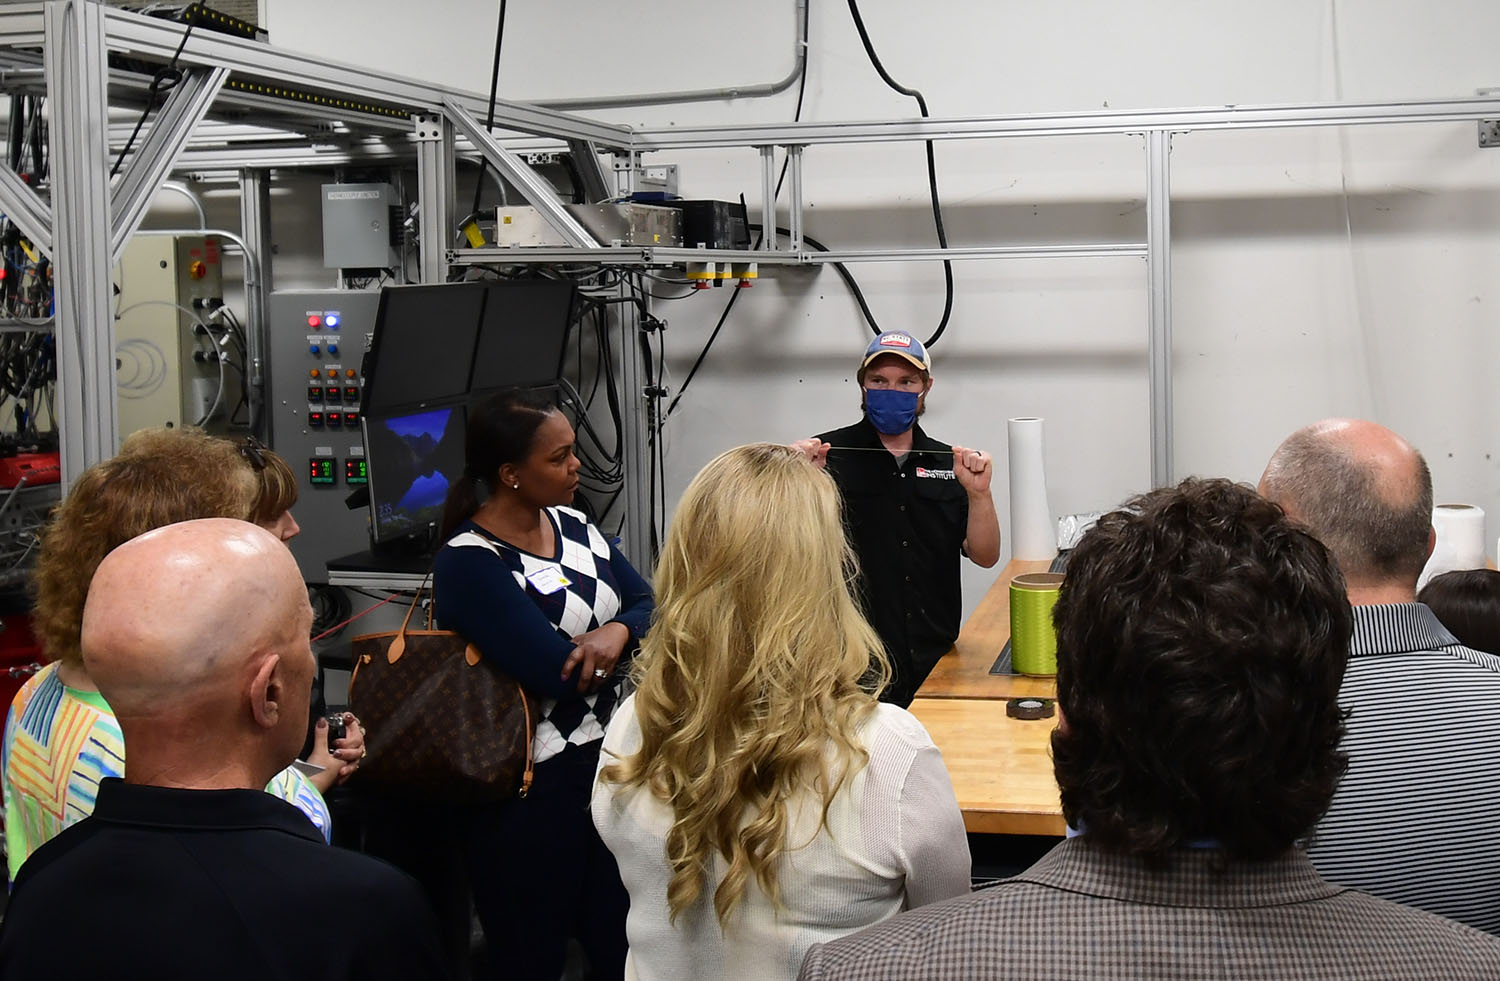 Leading Tour in Fiber & Polymer Science Lab, The Nonwovens Institute